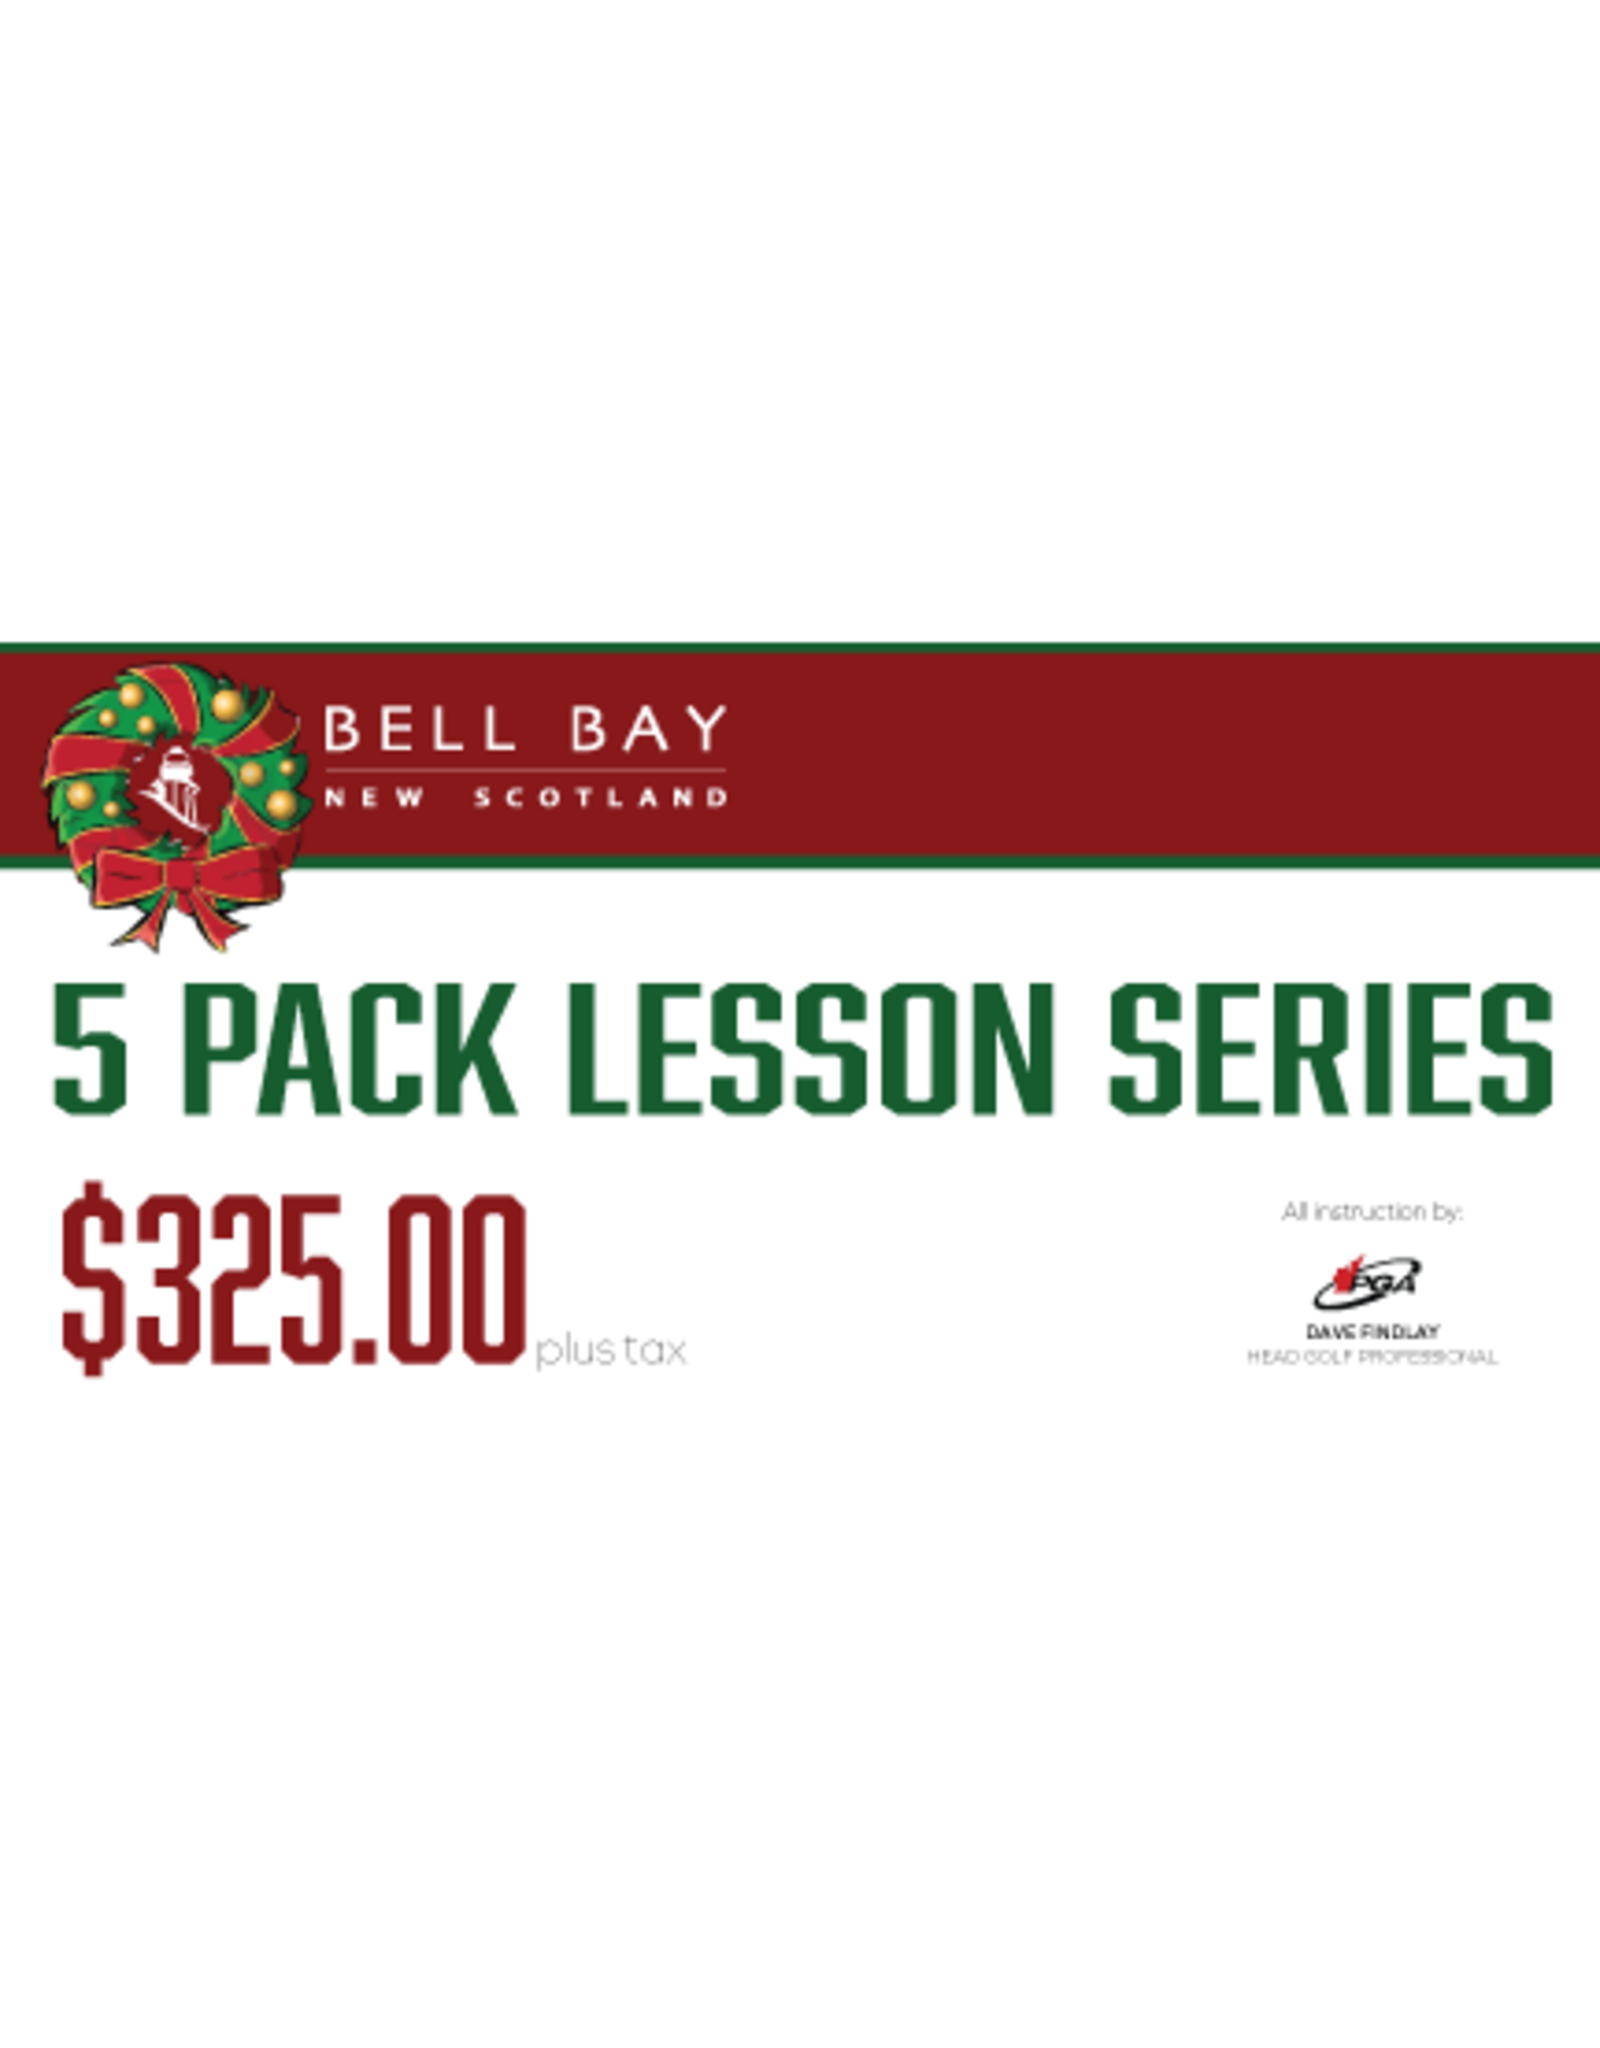 5 Pack Lesson Series